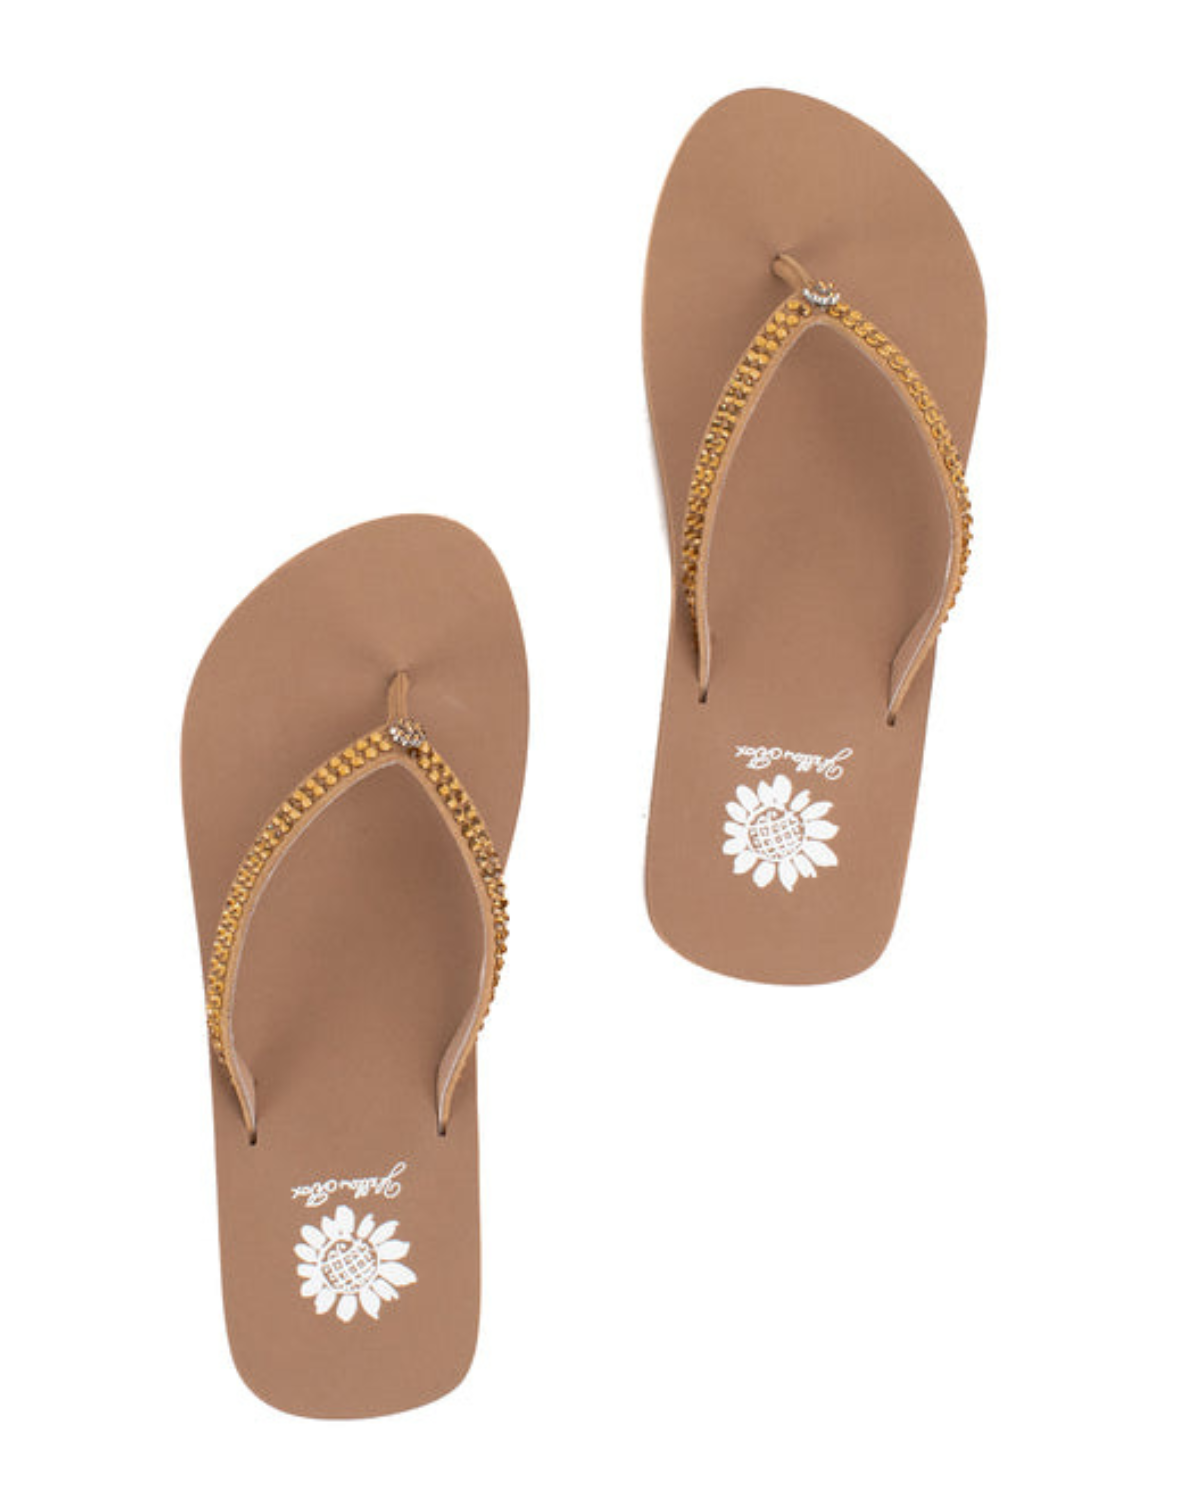 Women's tan wedge sandal with brown rhinestones on the strap.